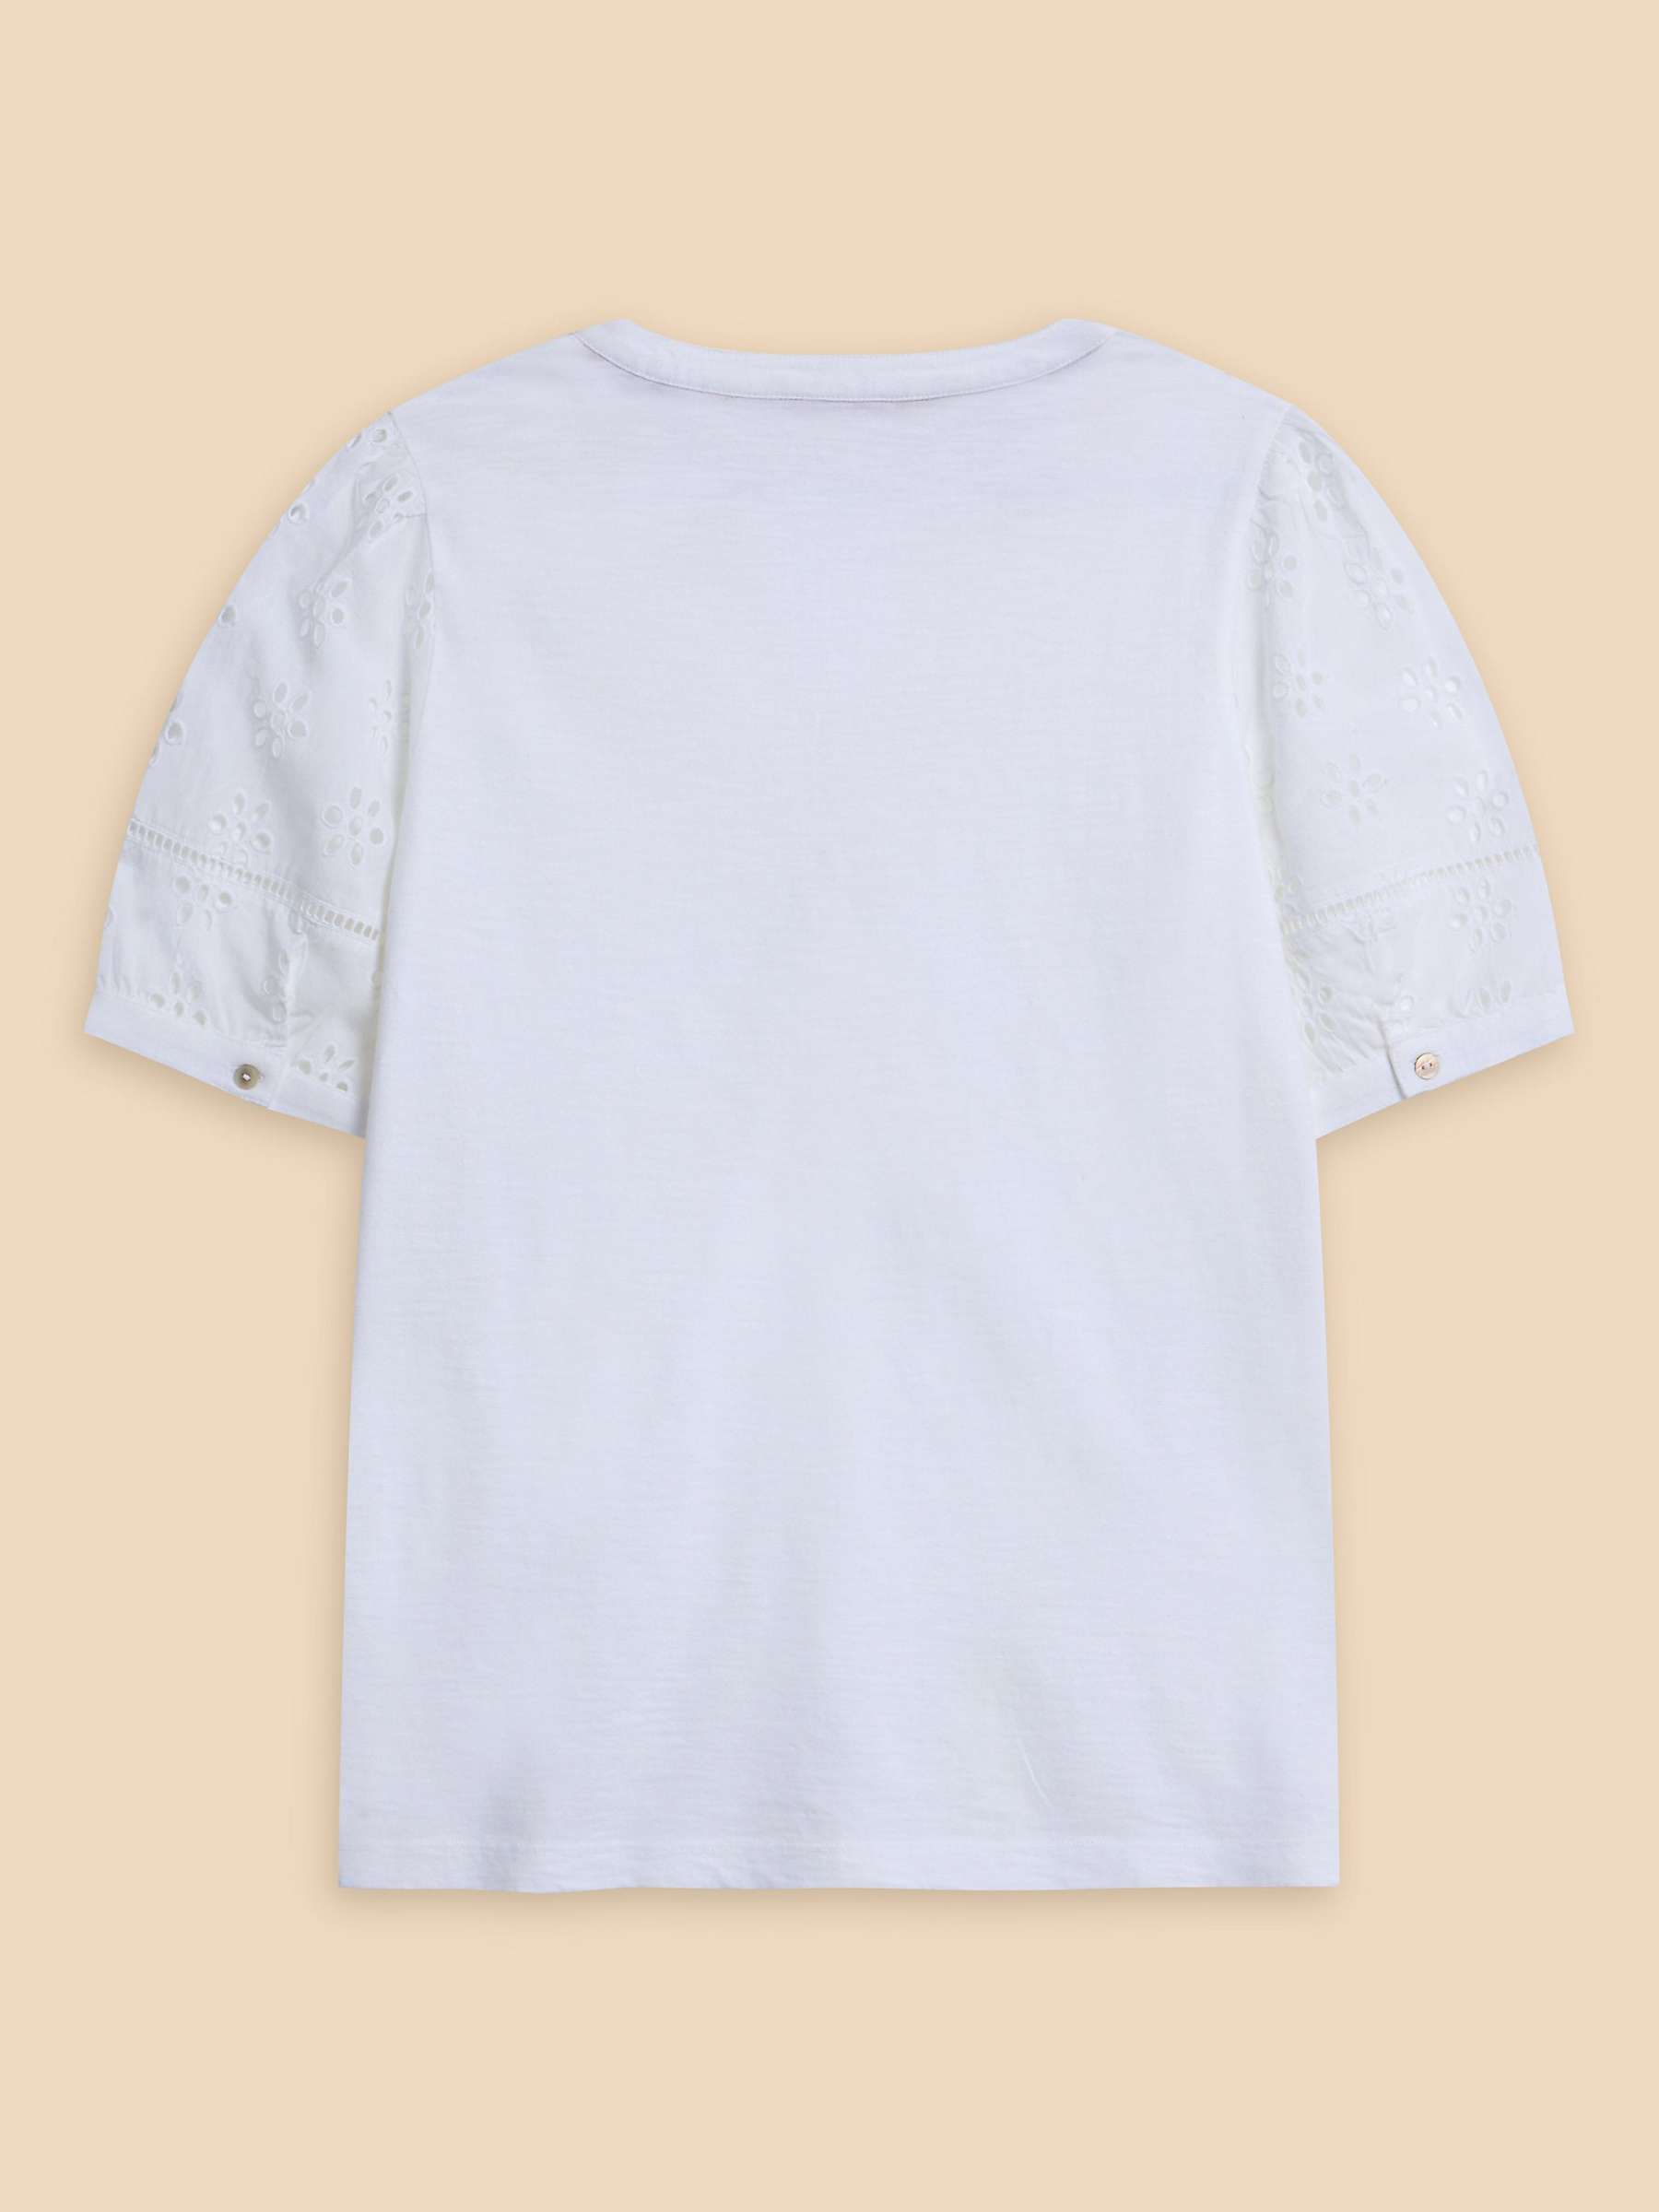 Buy White Stuff Broderie Anglaise Cotton Top, Brilliant White Online at johnlewis.com